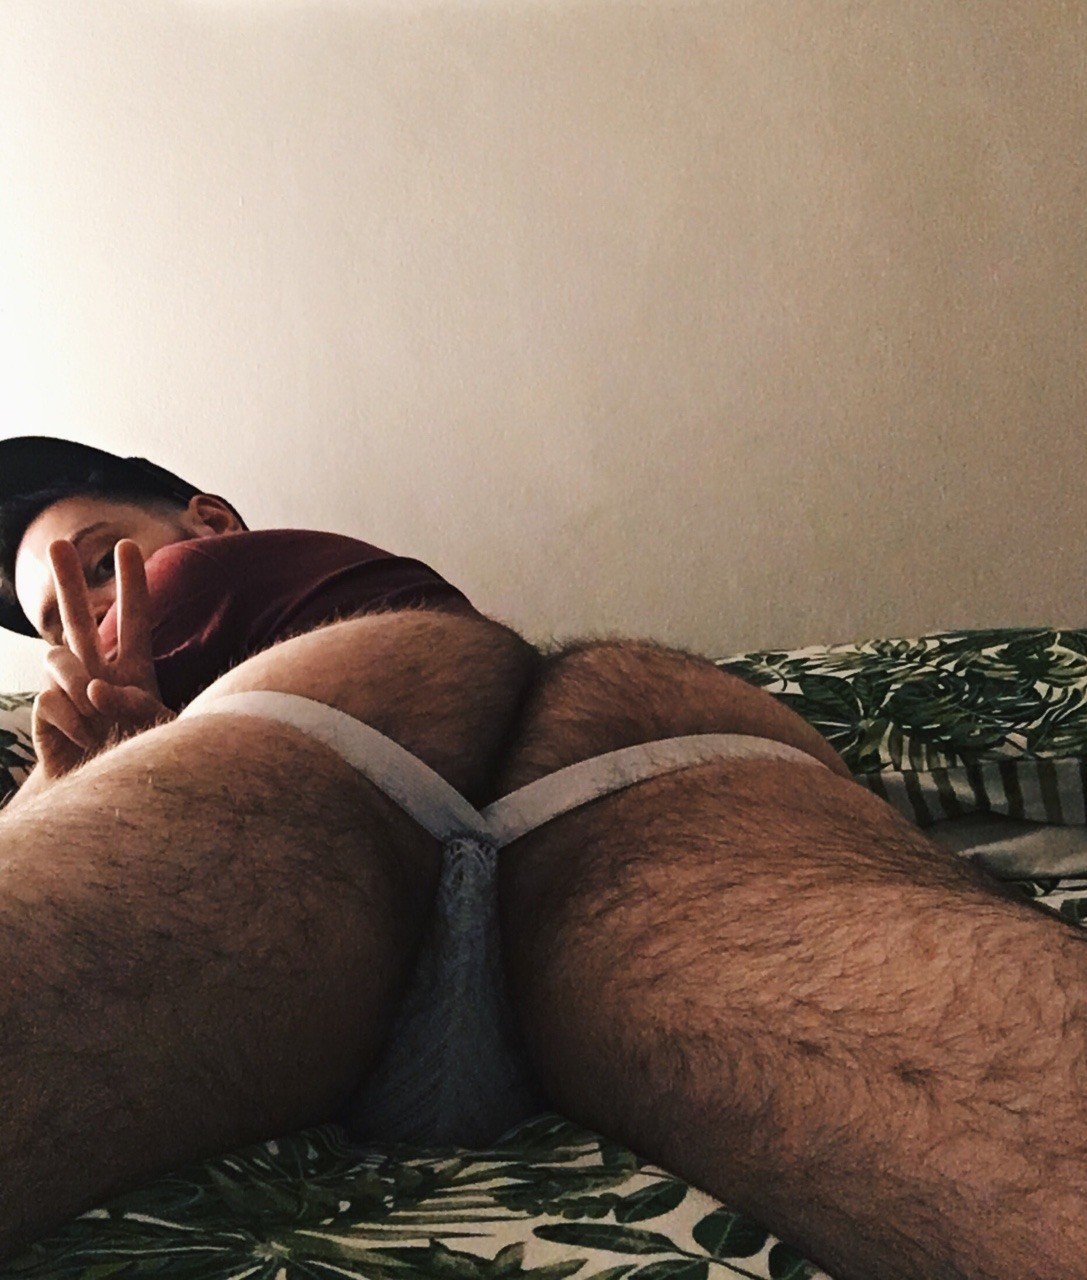 Photo by Smitty with the username @Resol702,  January 31, 2019 at 9:19 PM. The post is about the topic Hairy butt